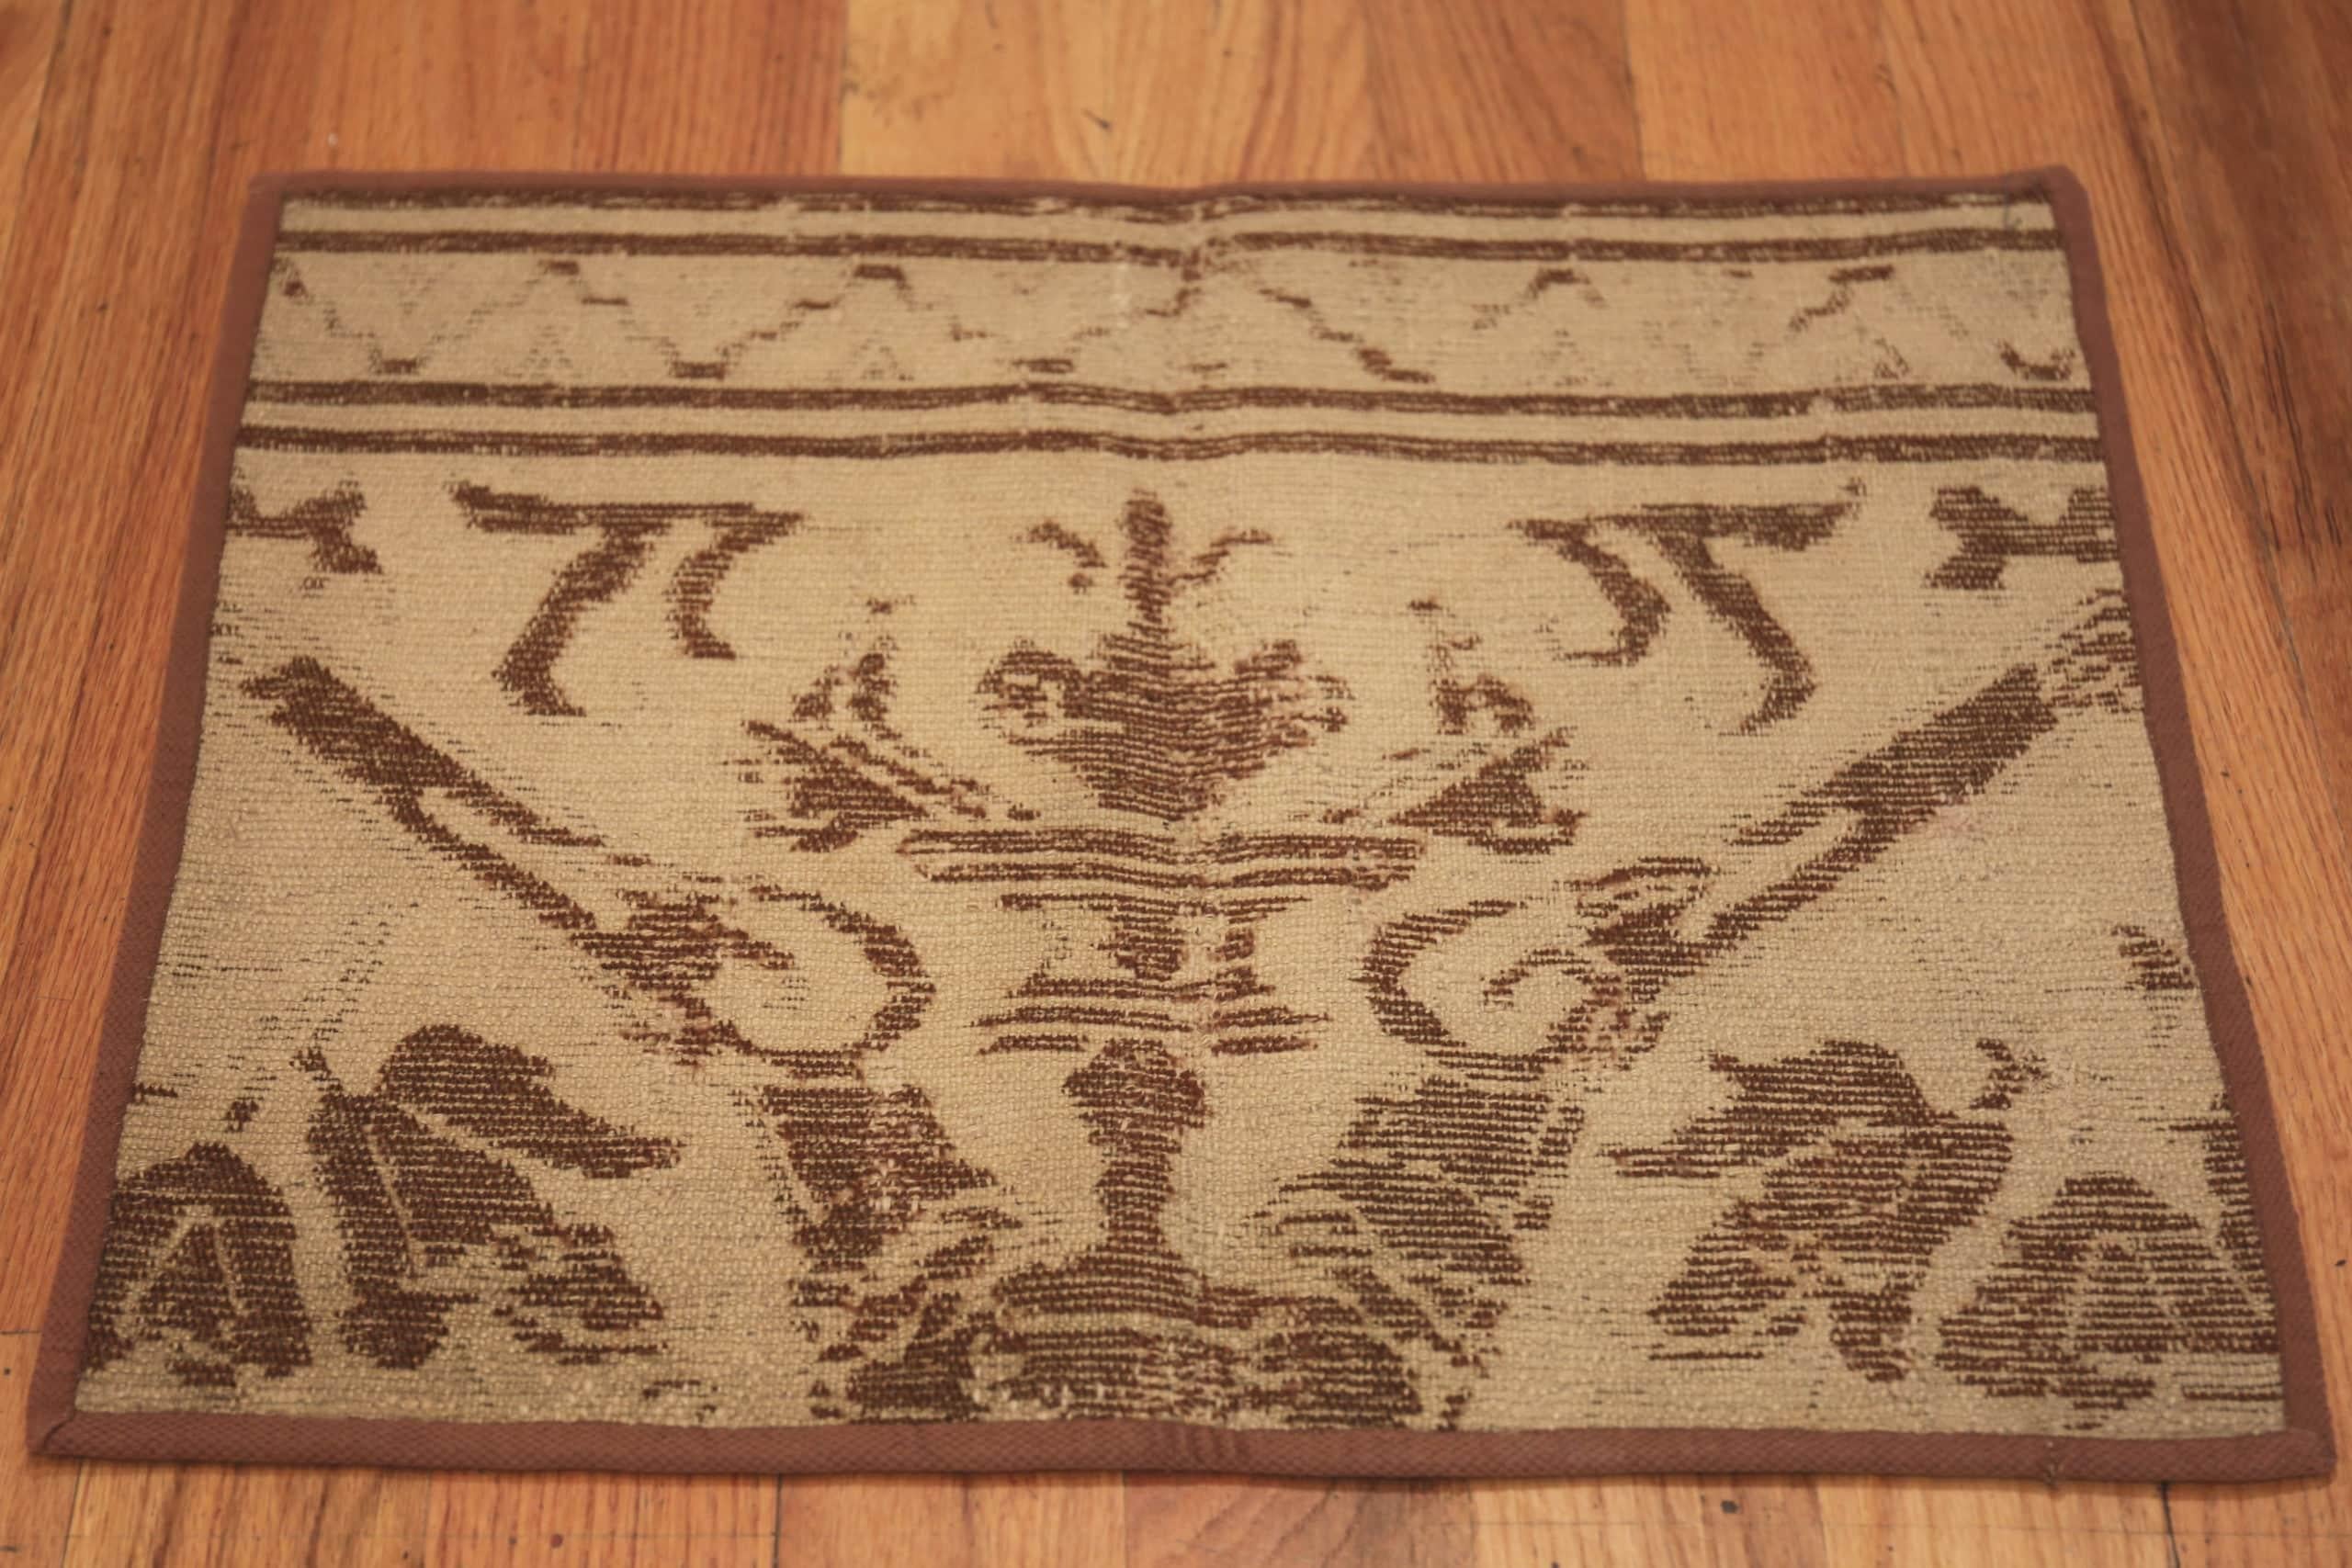 A Rare 16th Century Alcaraz Rug Fragment from Spain, Country of Origin / Rug Type: Spanish Rugs, Circa date: 16th Century